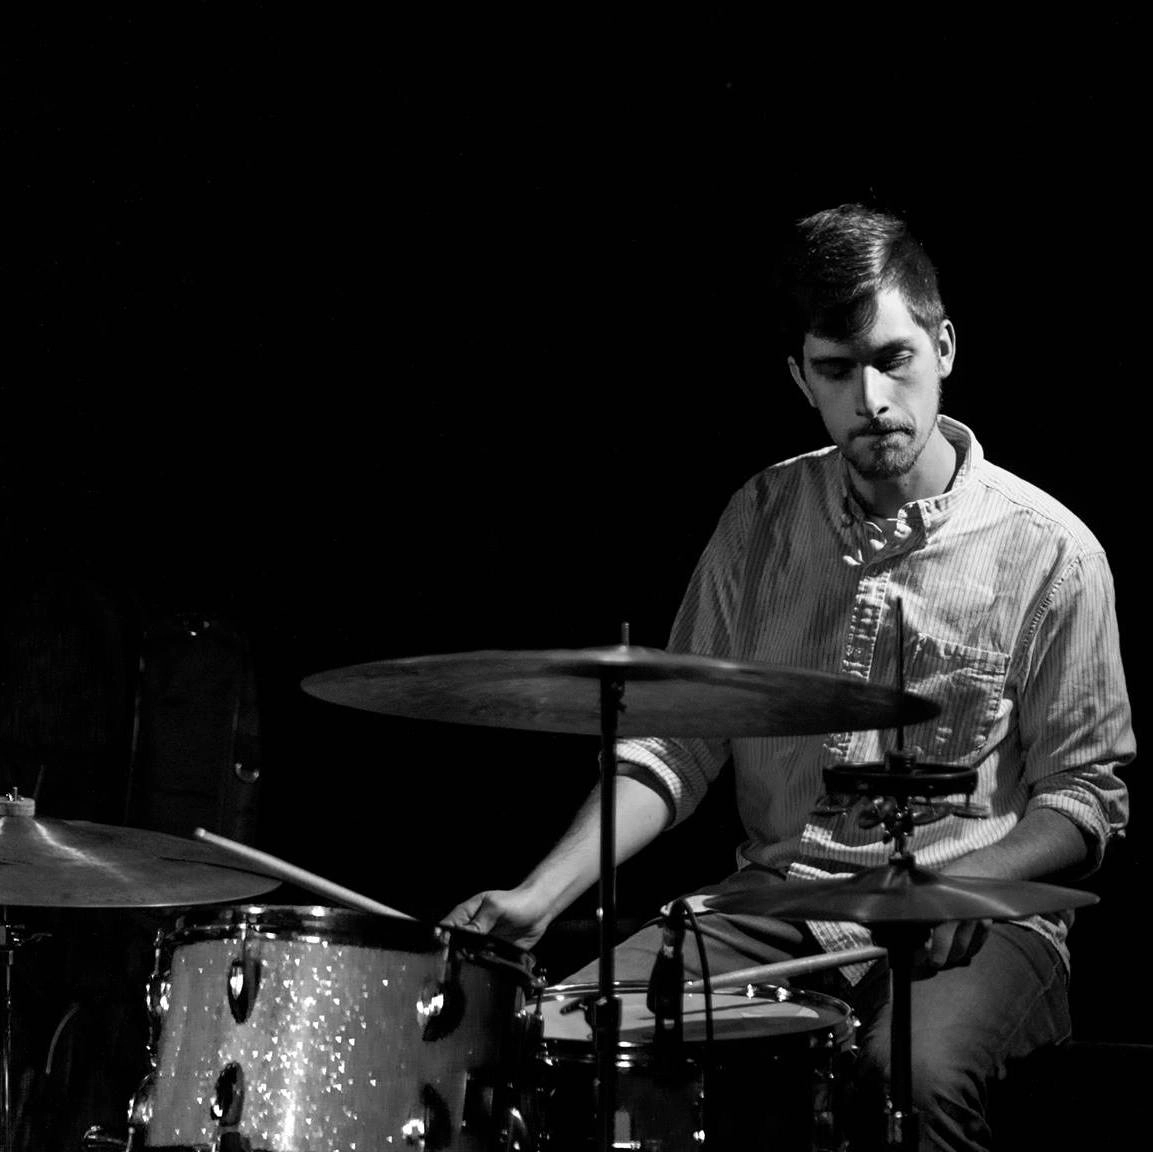 mason playing the drums in black & white